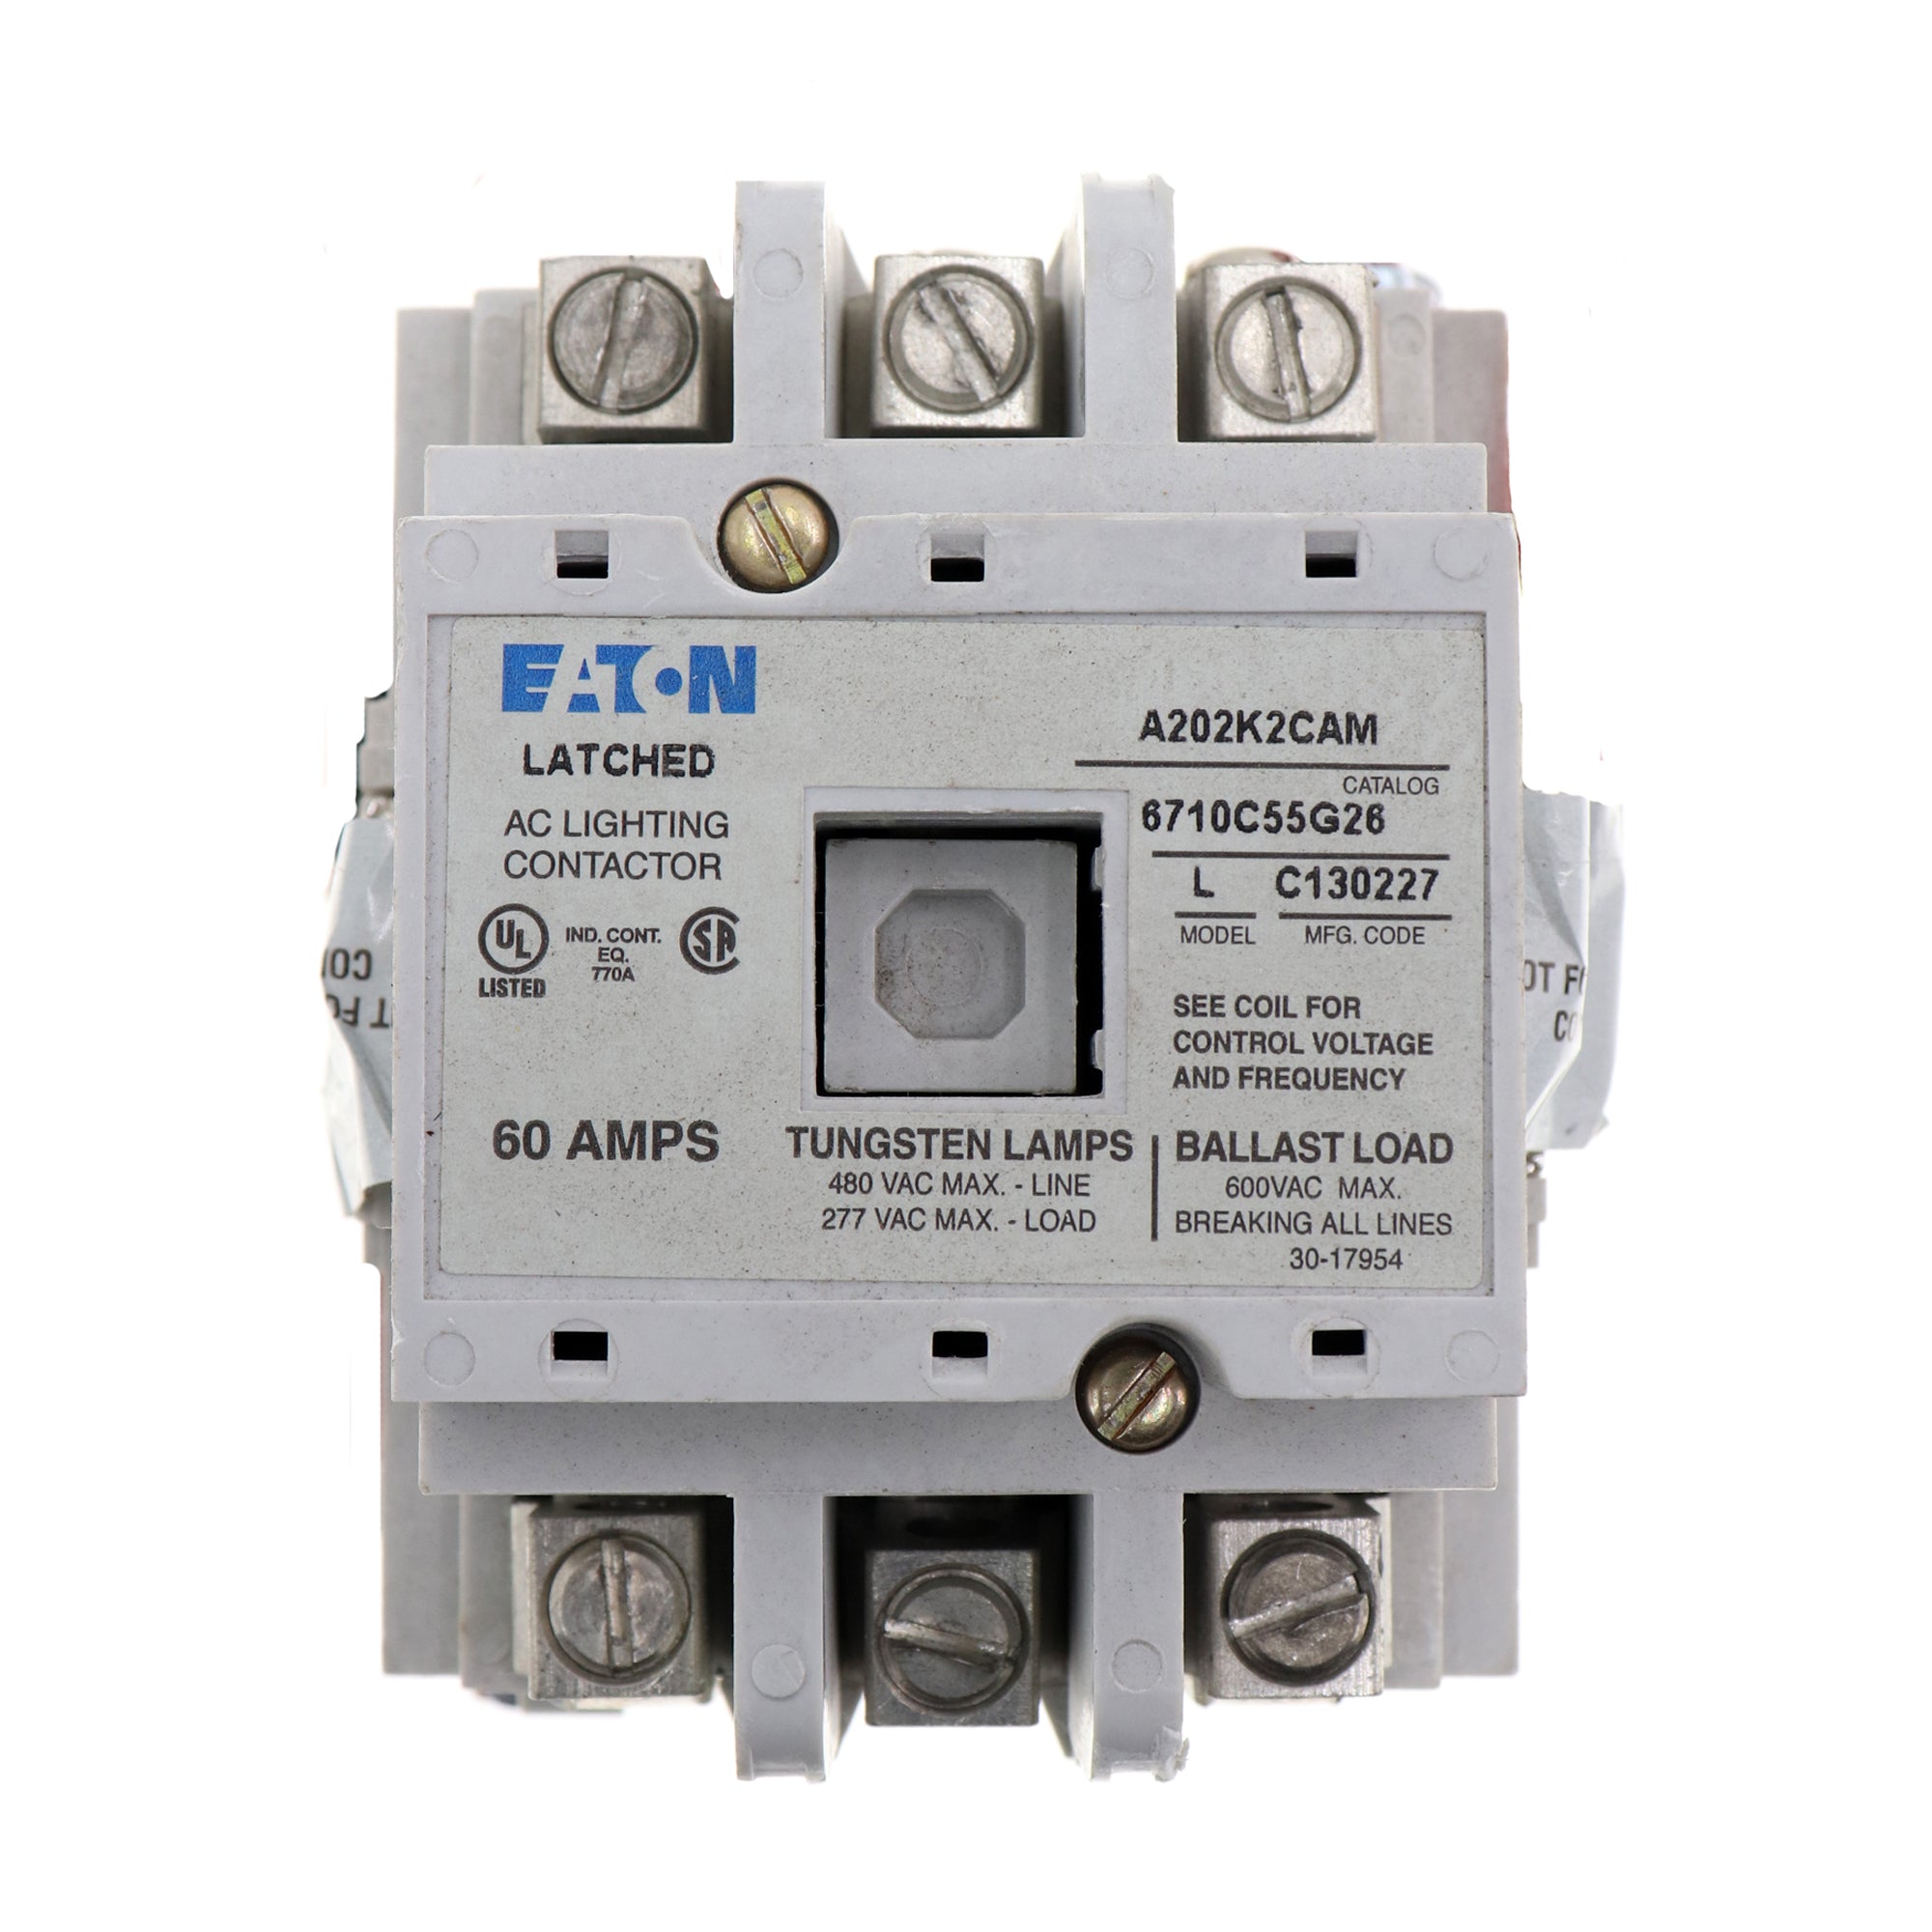 EATON, EATON A202K2CAM MAGNETICALLY LATCHING LIGHTING CONTACTOR, 3P, 60A, 120V COIL